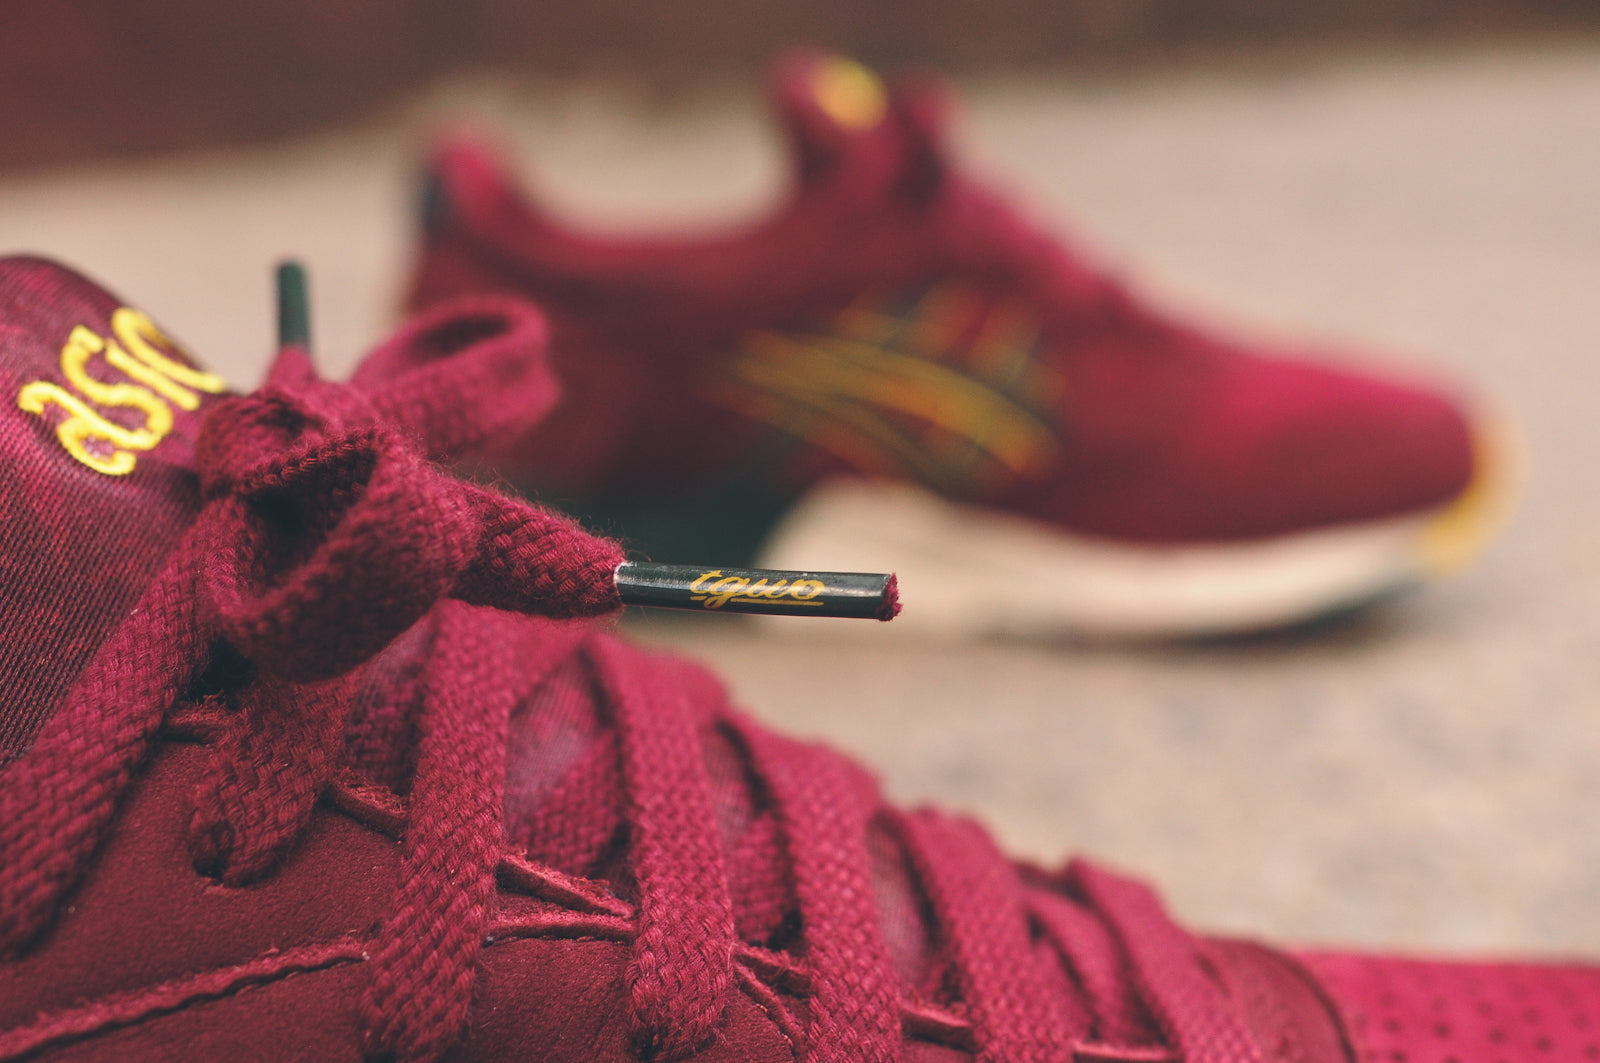 Asics X The Good Will Out Gel Lyte V - 